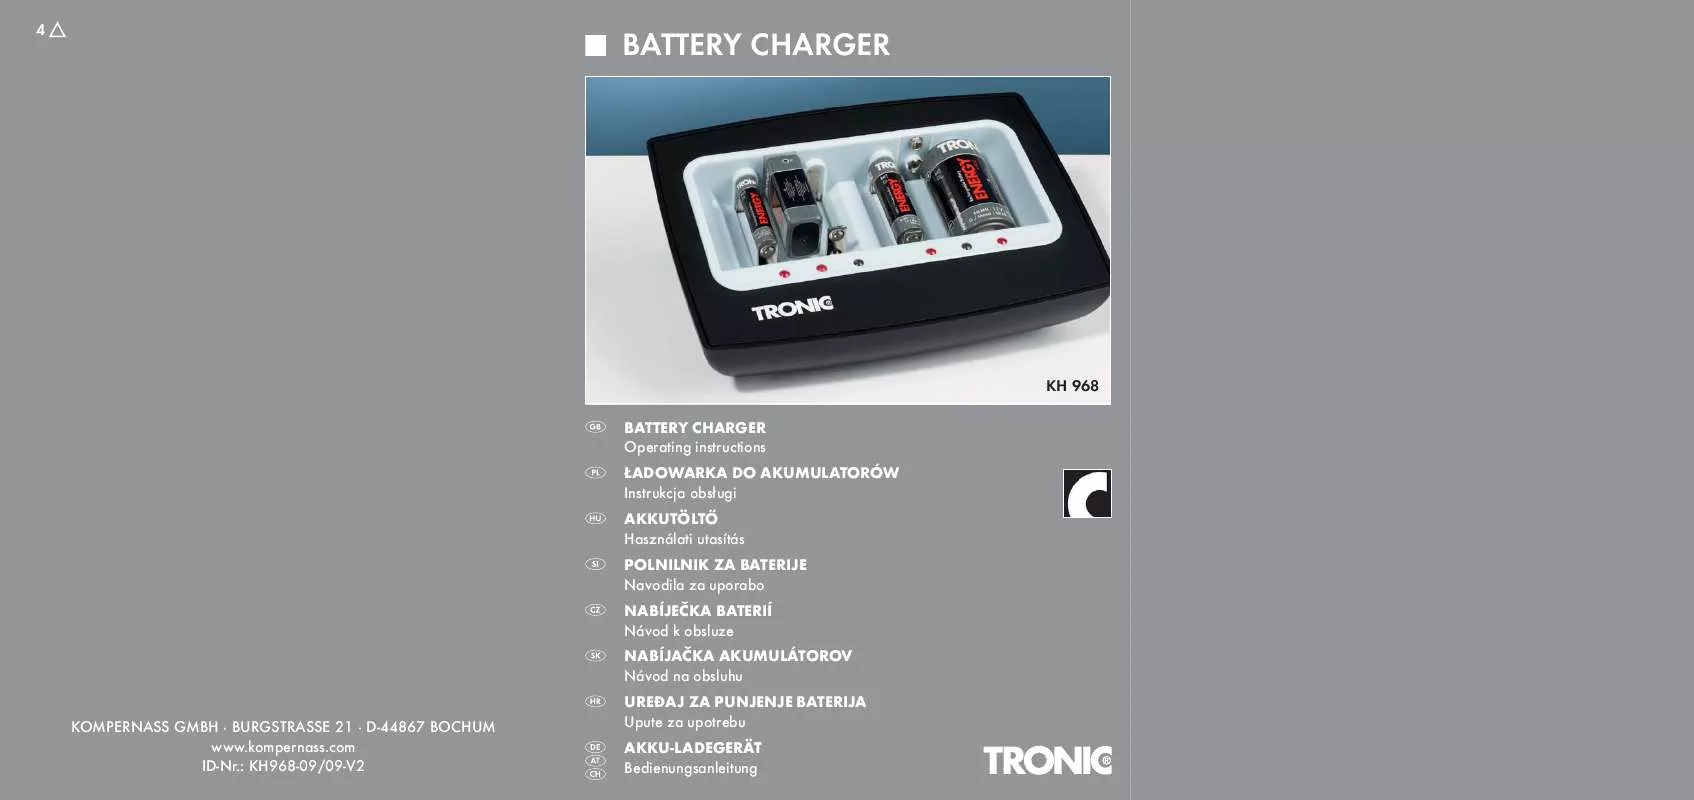 Mode d'emploi TRONIC KH 968 BATTERY CHARGER